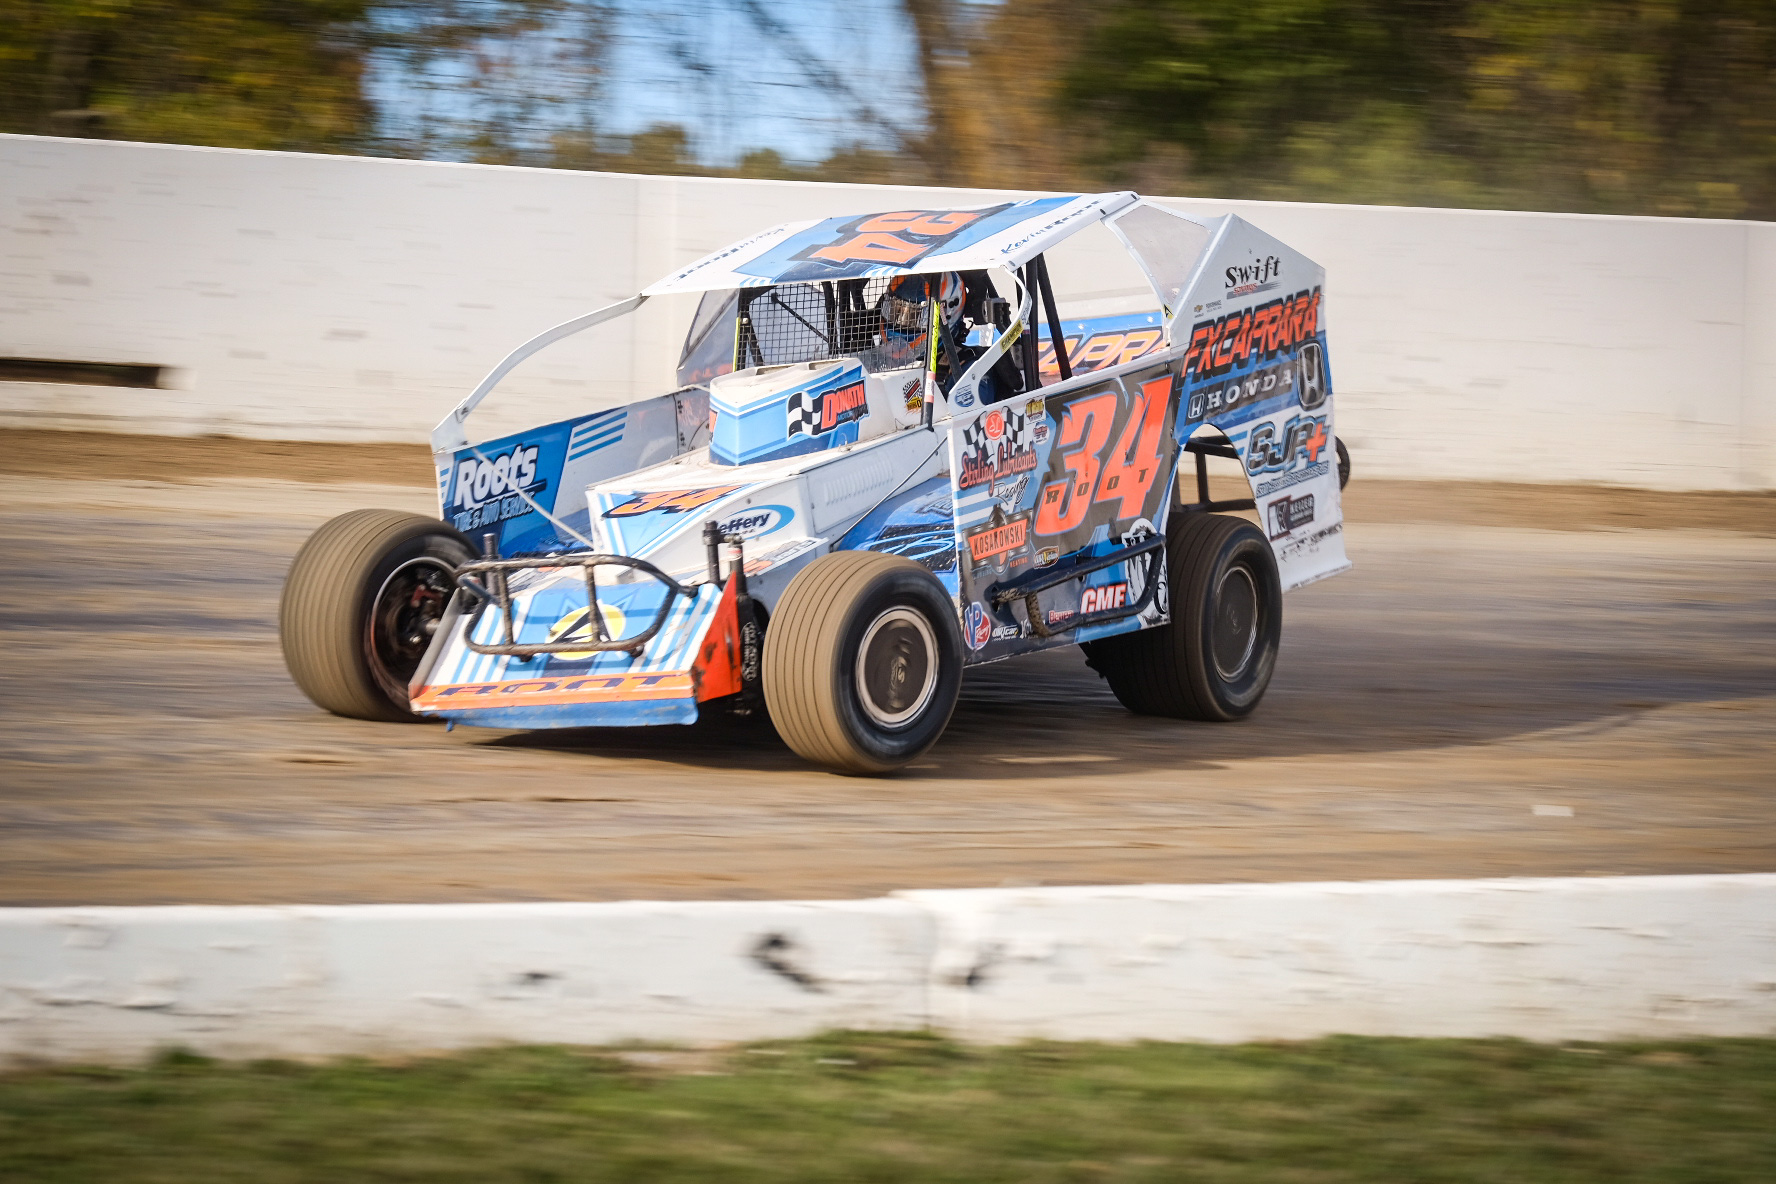 GRAND FINALE: Sportsman Modifieds Conclude OktoberFAST at Weedsport